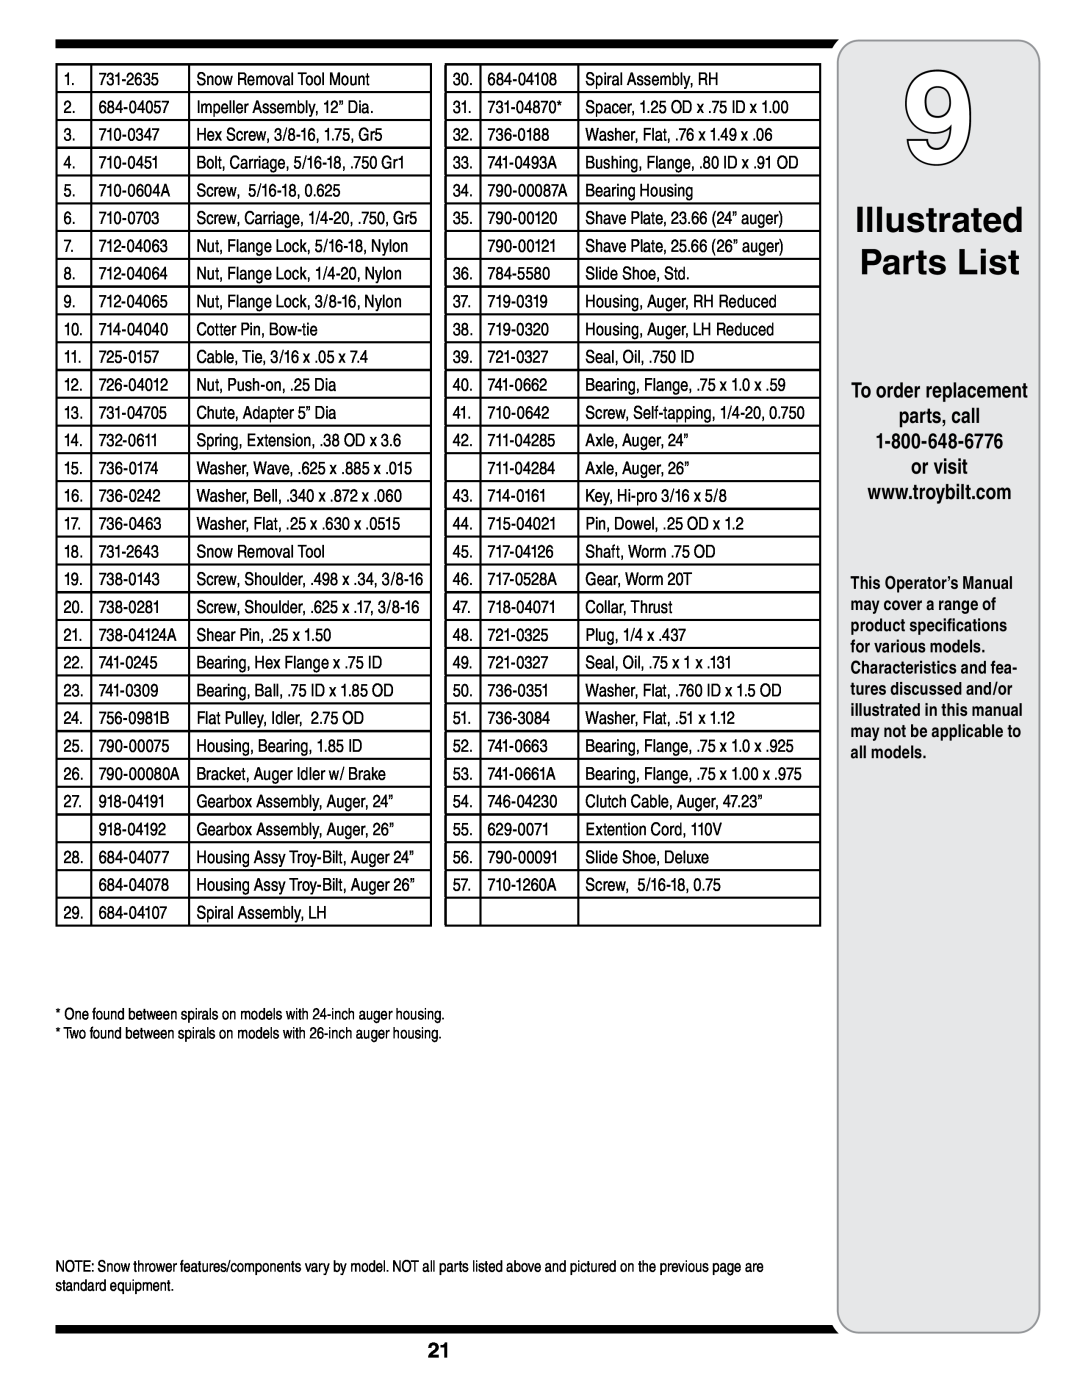 Troy-Bilt STORM Series warranty Illustrated Parts List, To order replacement parts, call, or visit 